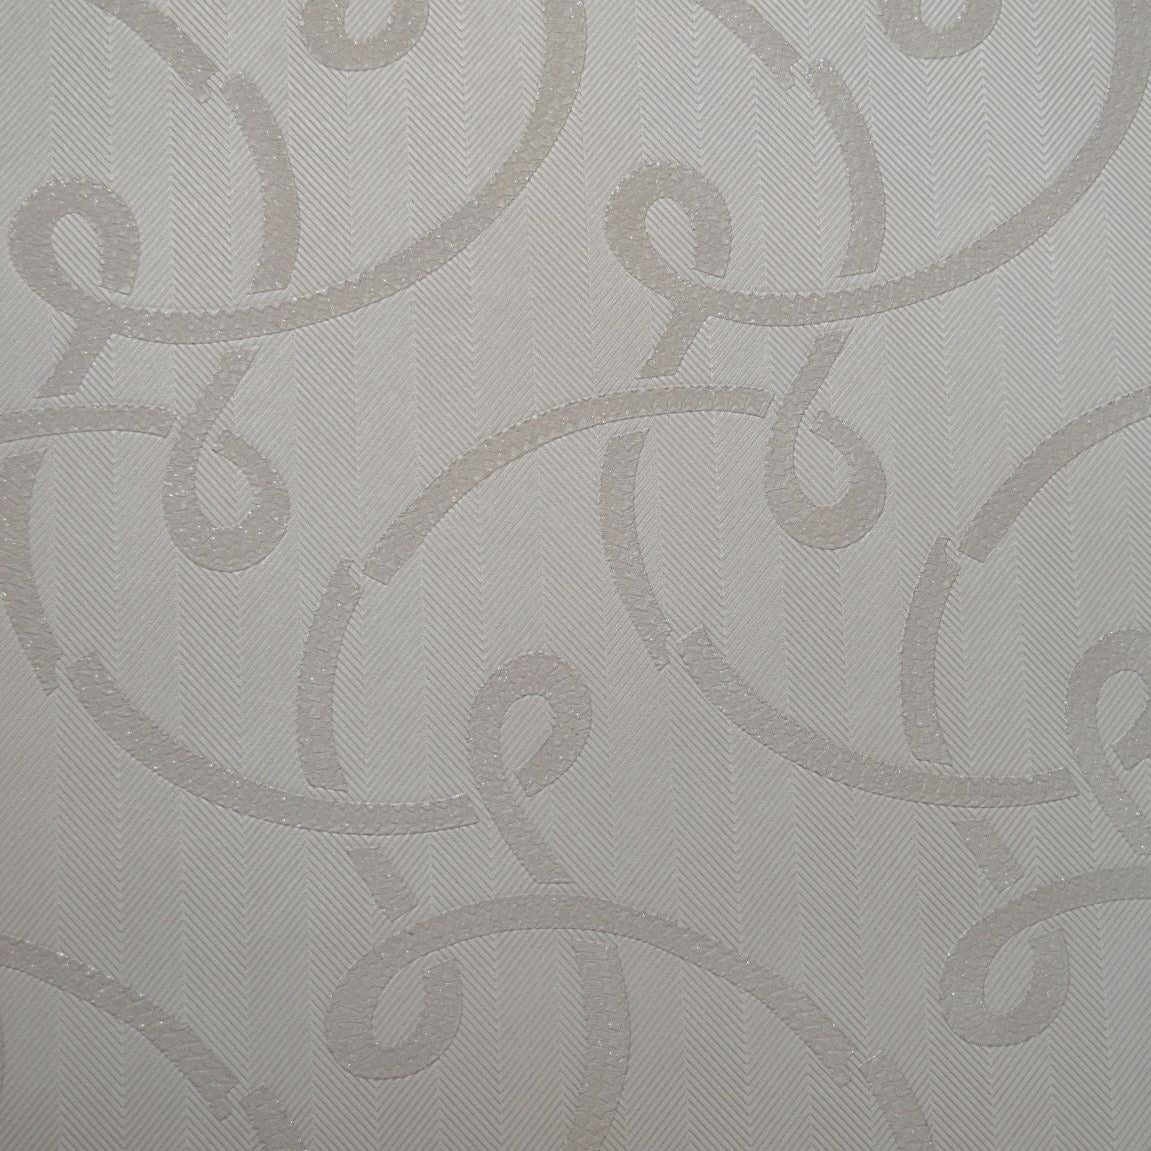 White with Silver Swirls and light shimmer Luxury Wallpapers -15mtr Length and 1mtr Width-Equal to Normal 3Rolls